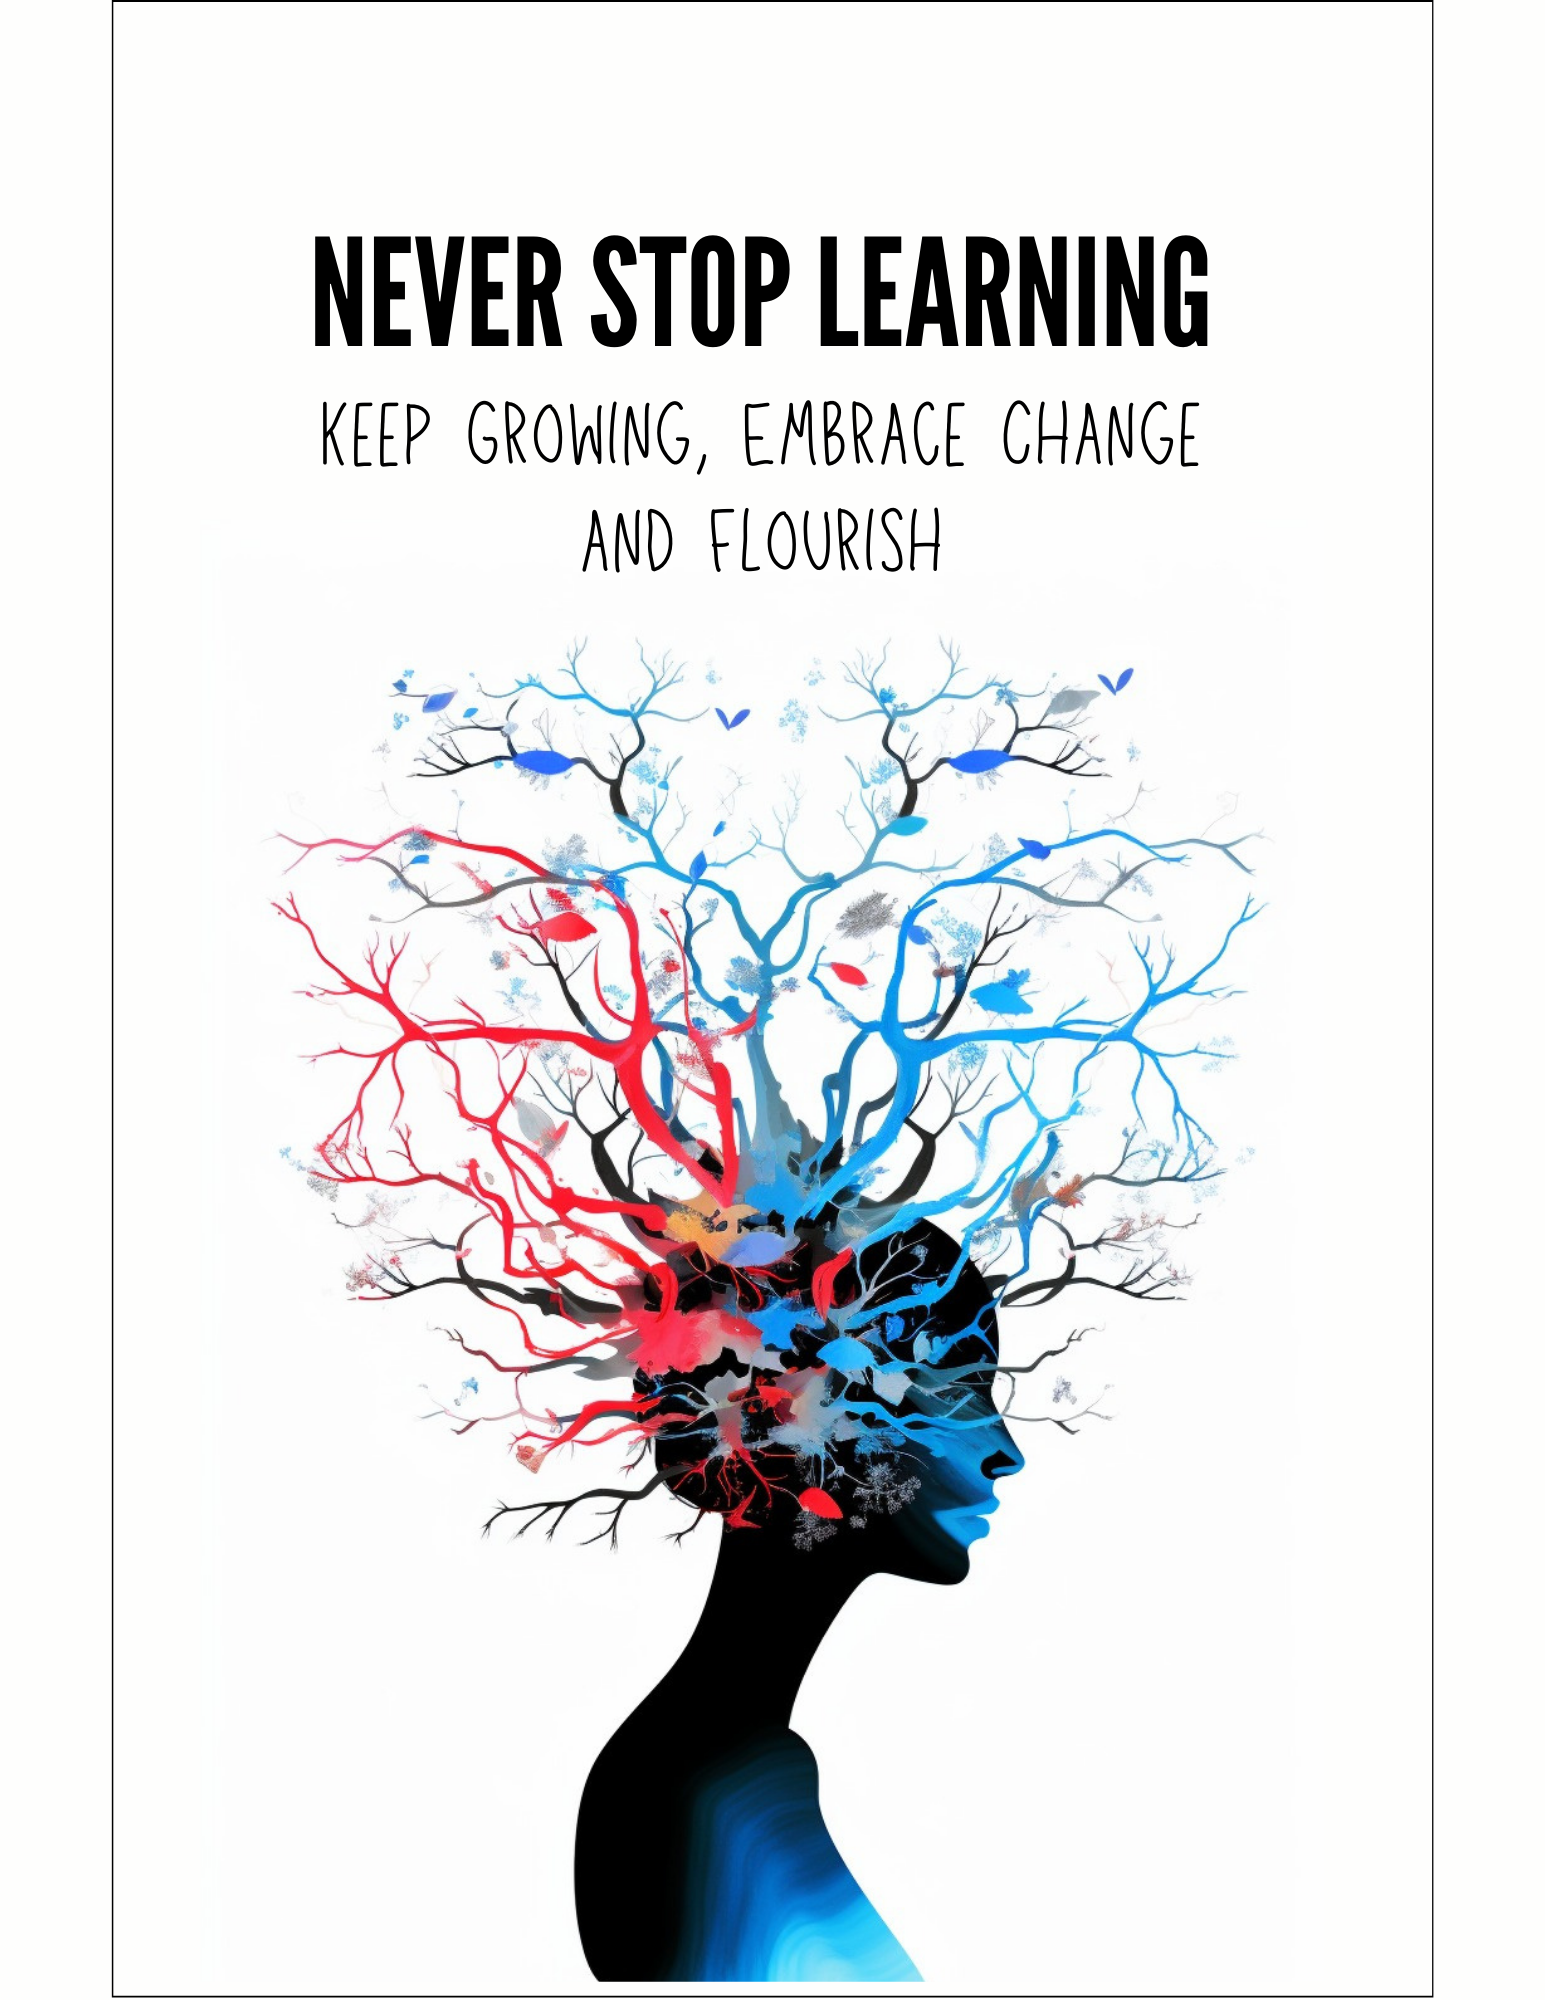 Never-stop-learning-journal